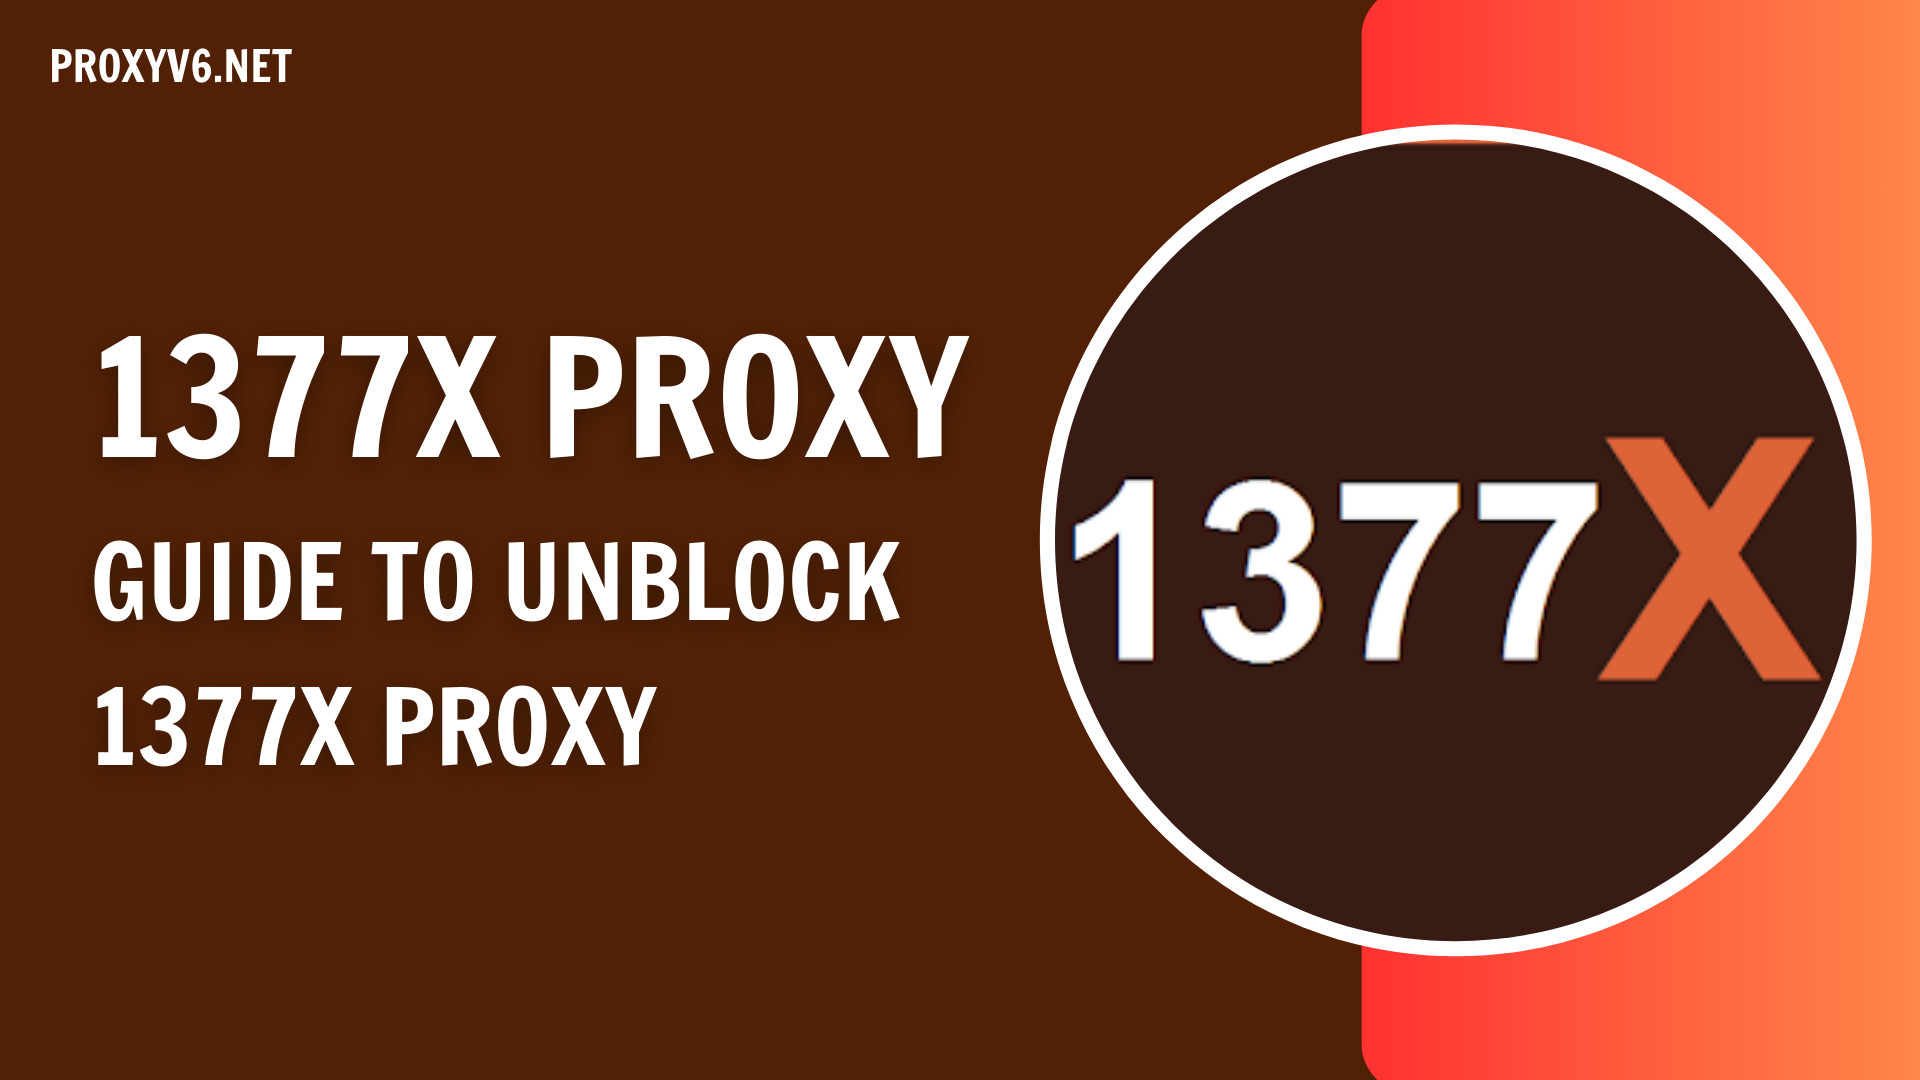 1377x Proxy: Guide to unblock 1377x Proxy